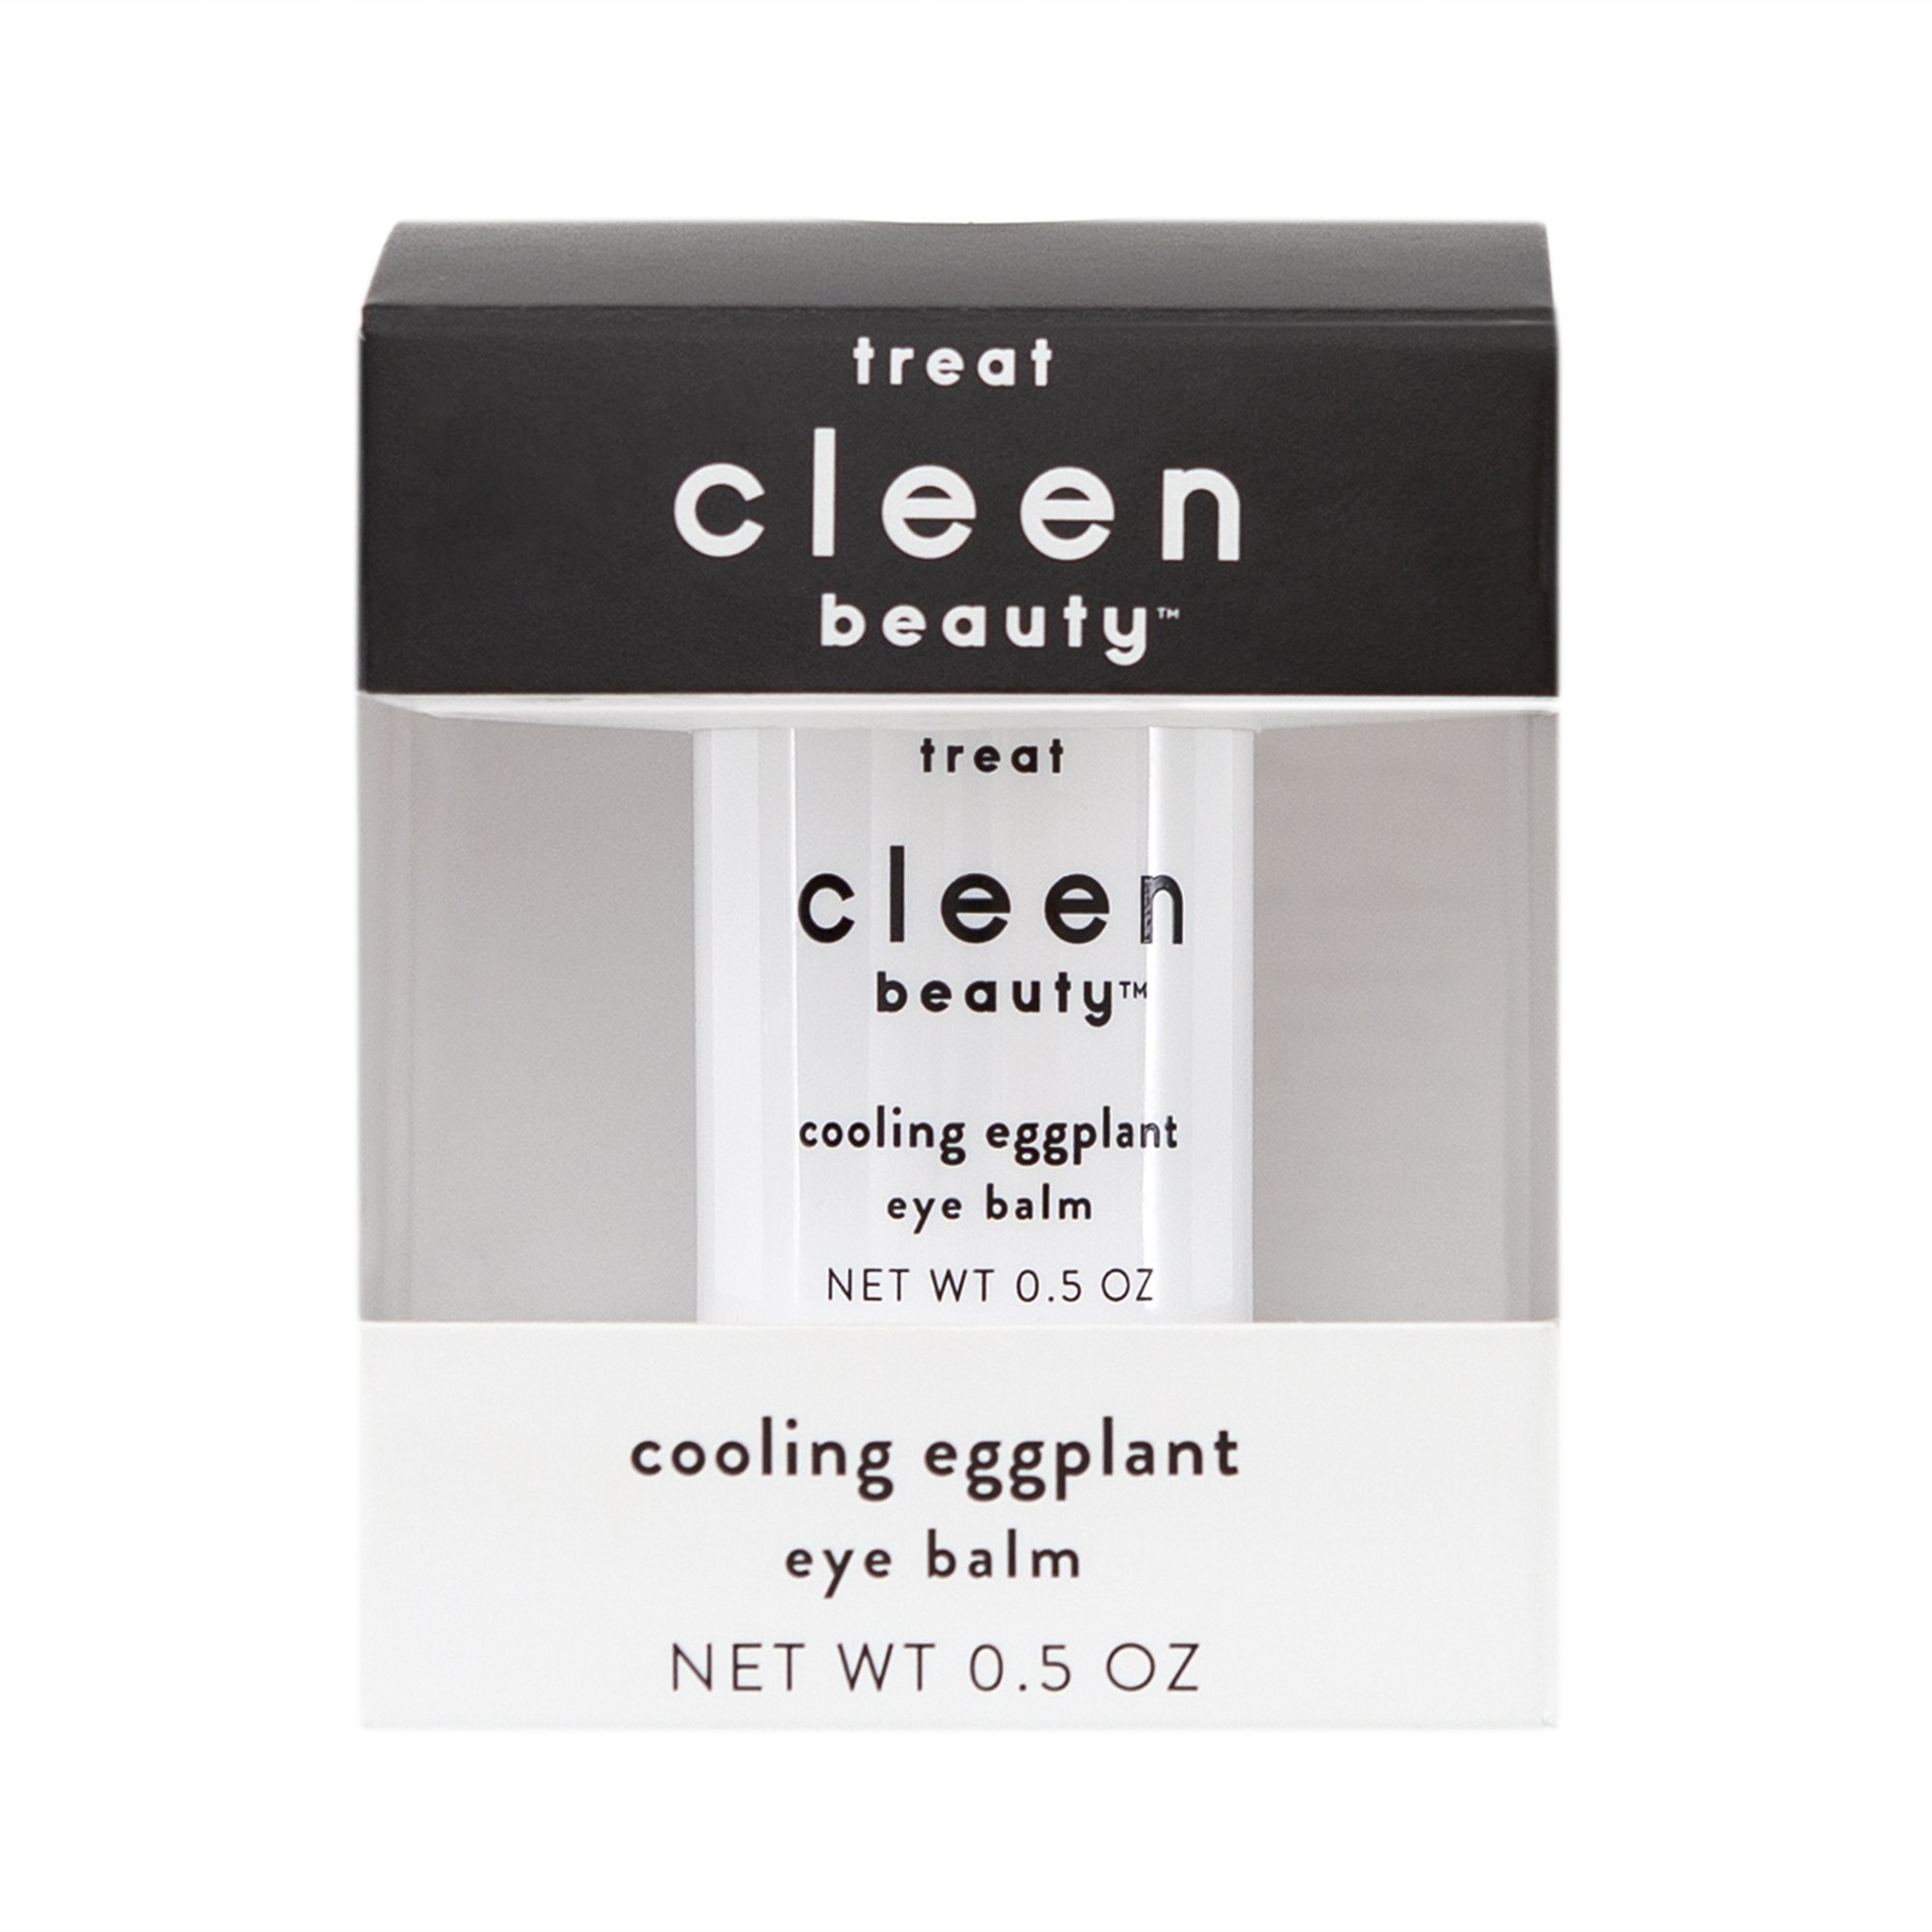 cleen beauty Cooling Eye Balm with Eggplant & Coffee Oil, 0.5 oz - image 4 of 7